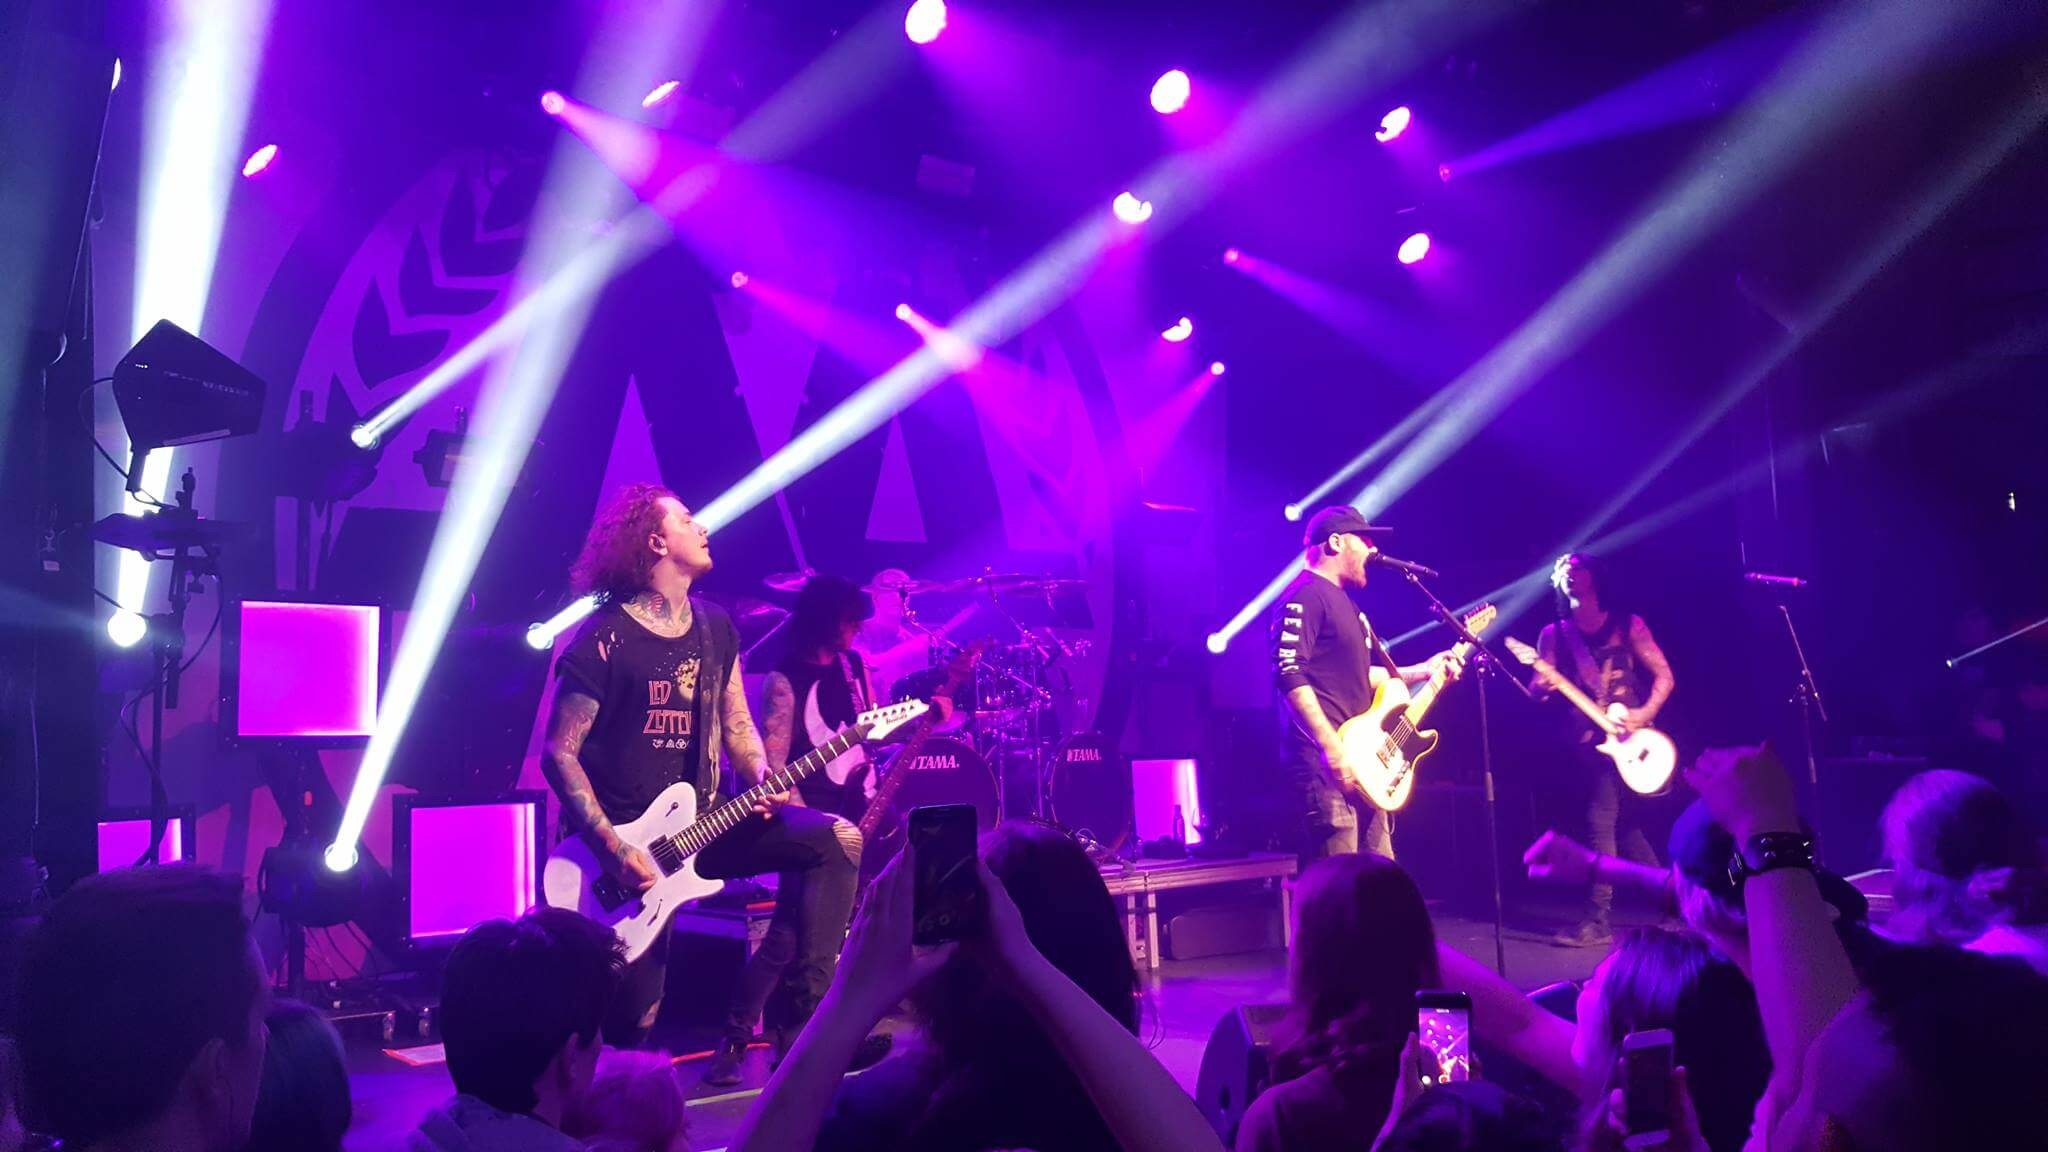 2048x1152 Live Review: Asking Alexandria + The Word Alive + Bohem - Train -  17.03.2017 - Sound of Aarhus